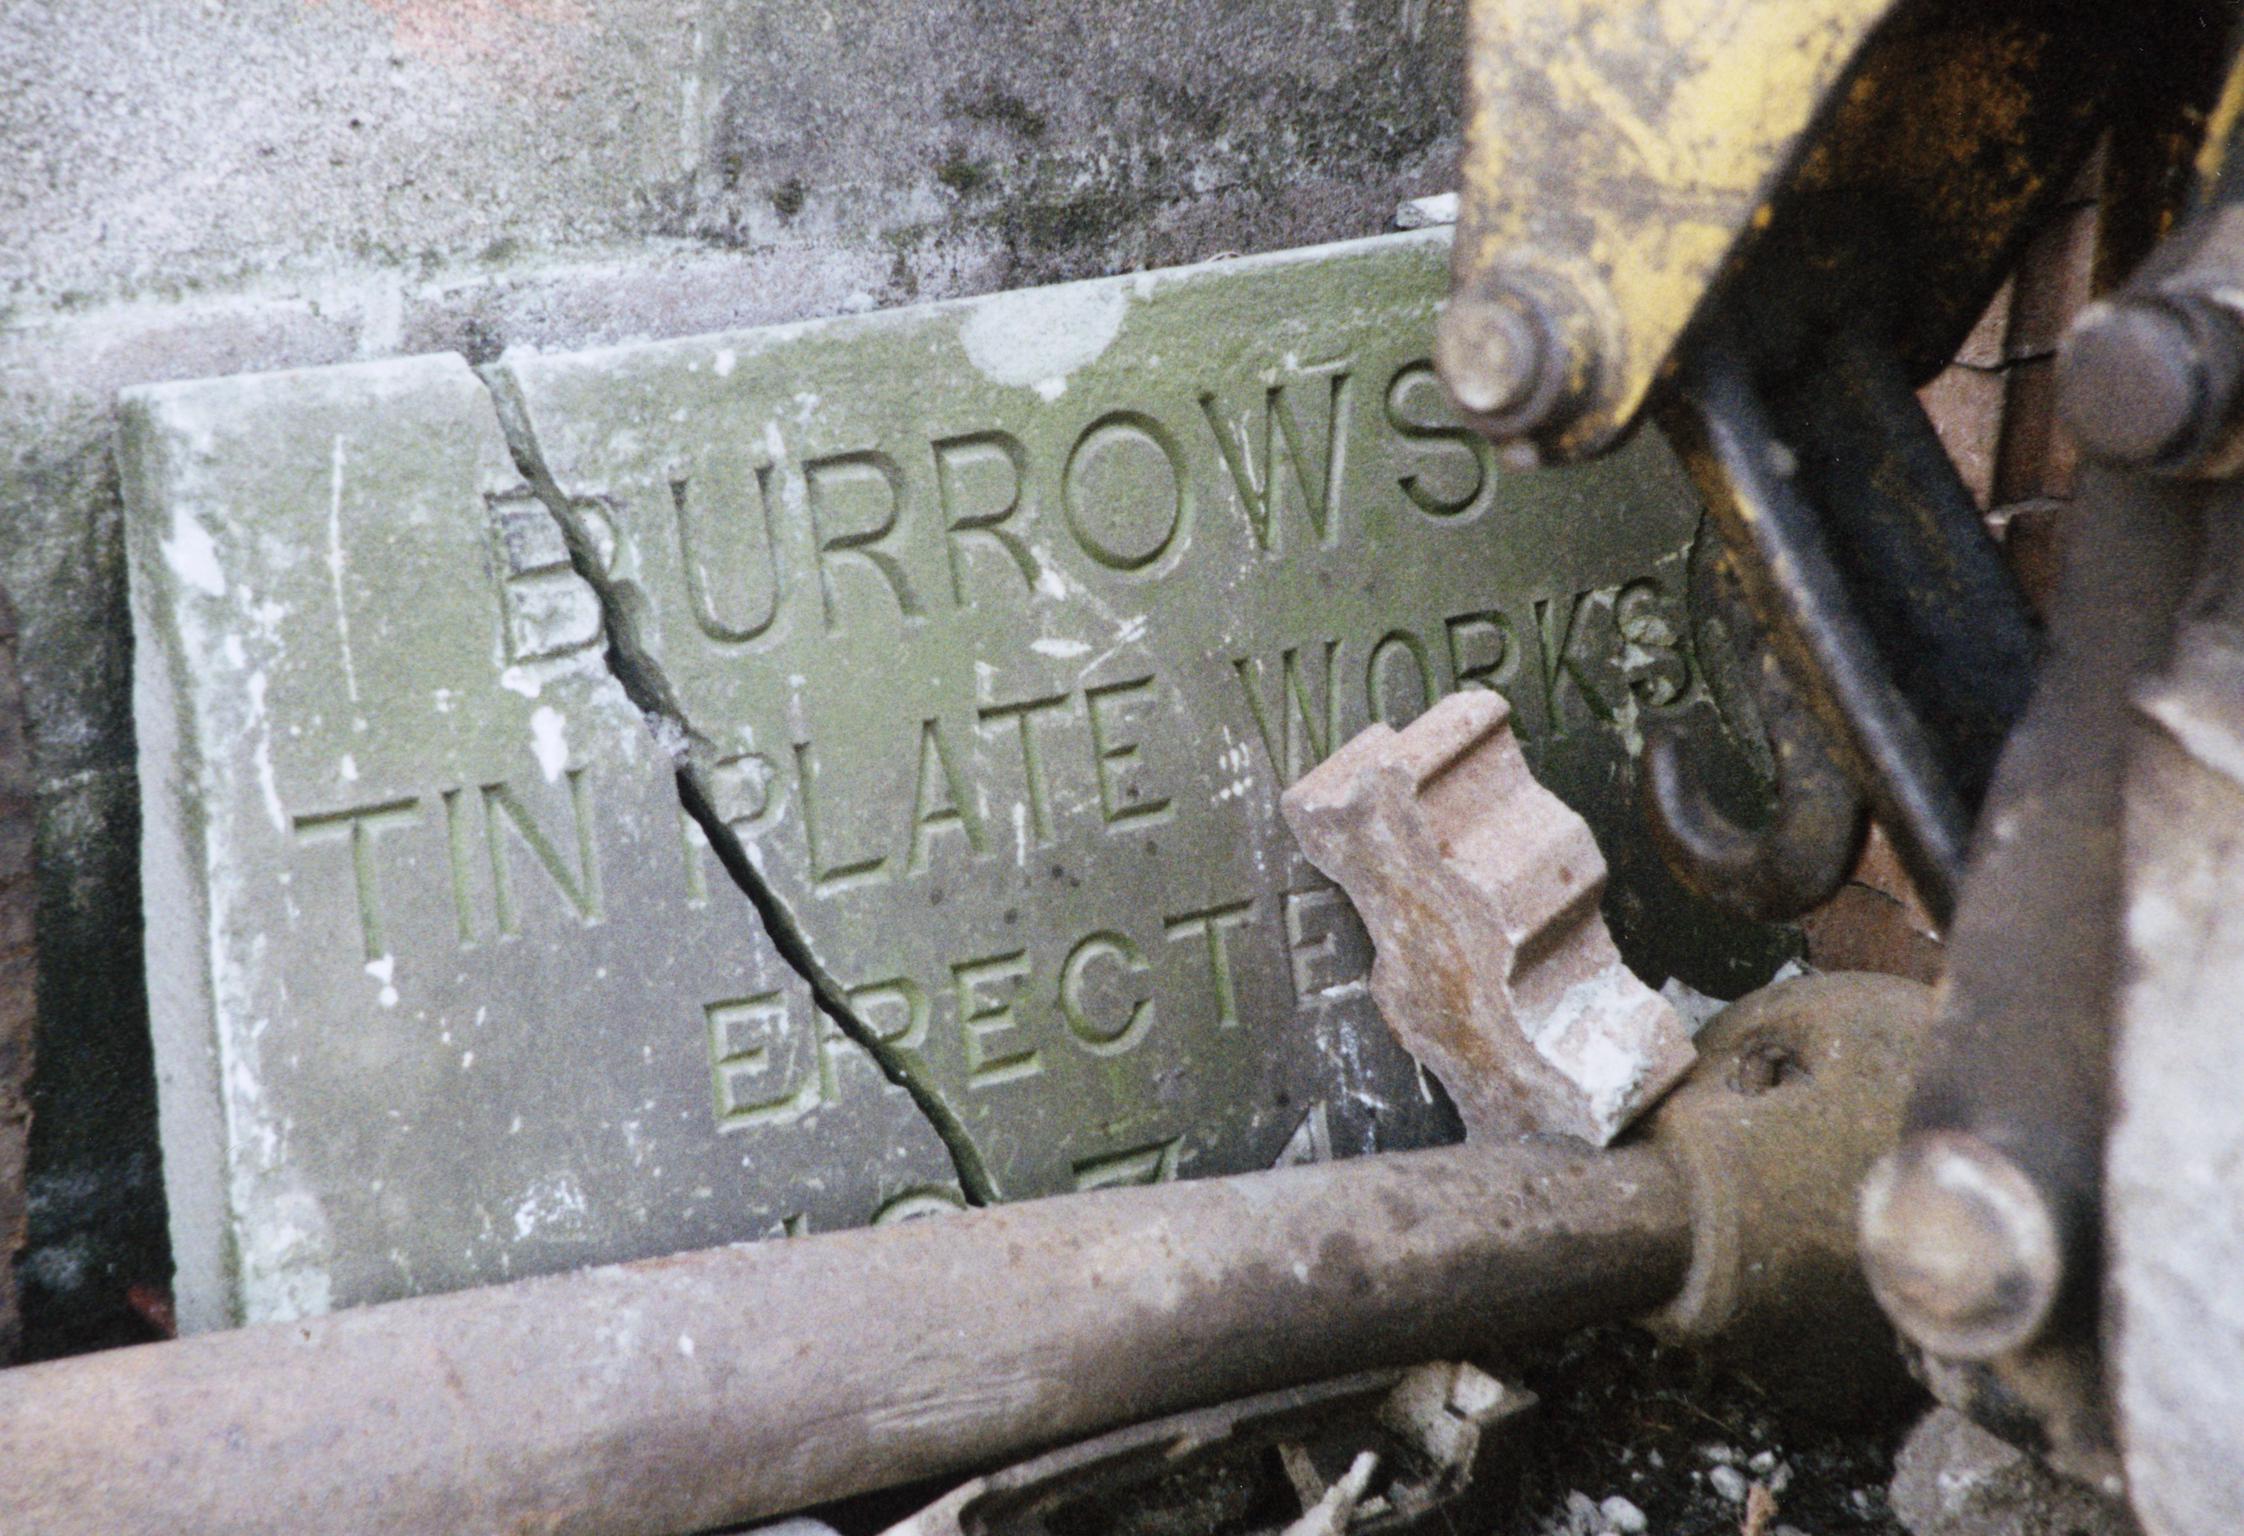 Burrows tinplate works plaque, photograph